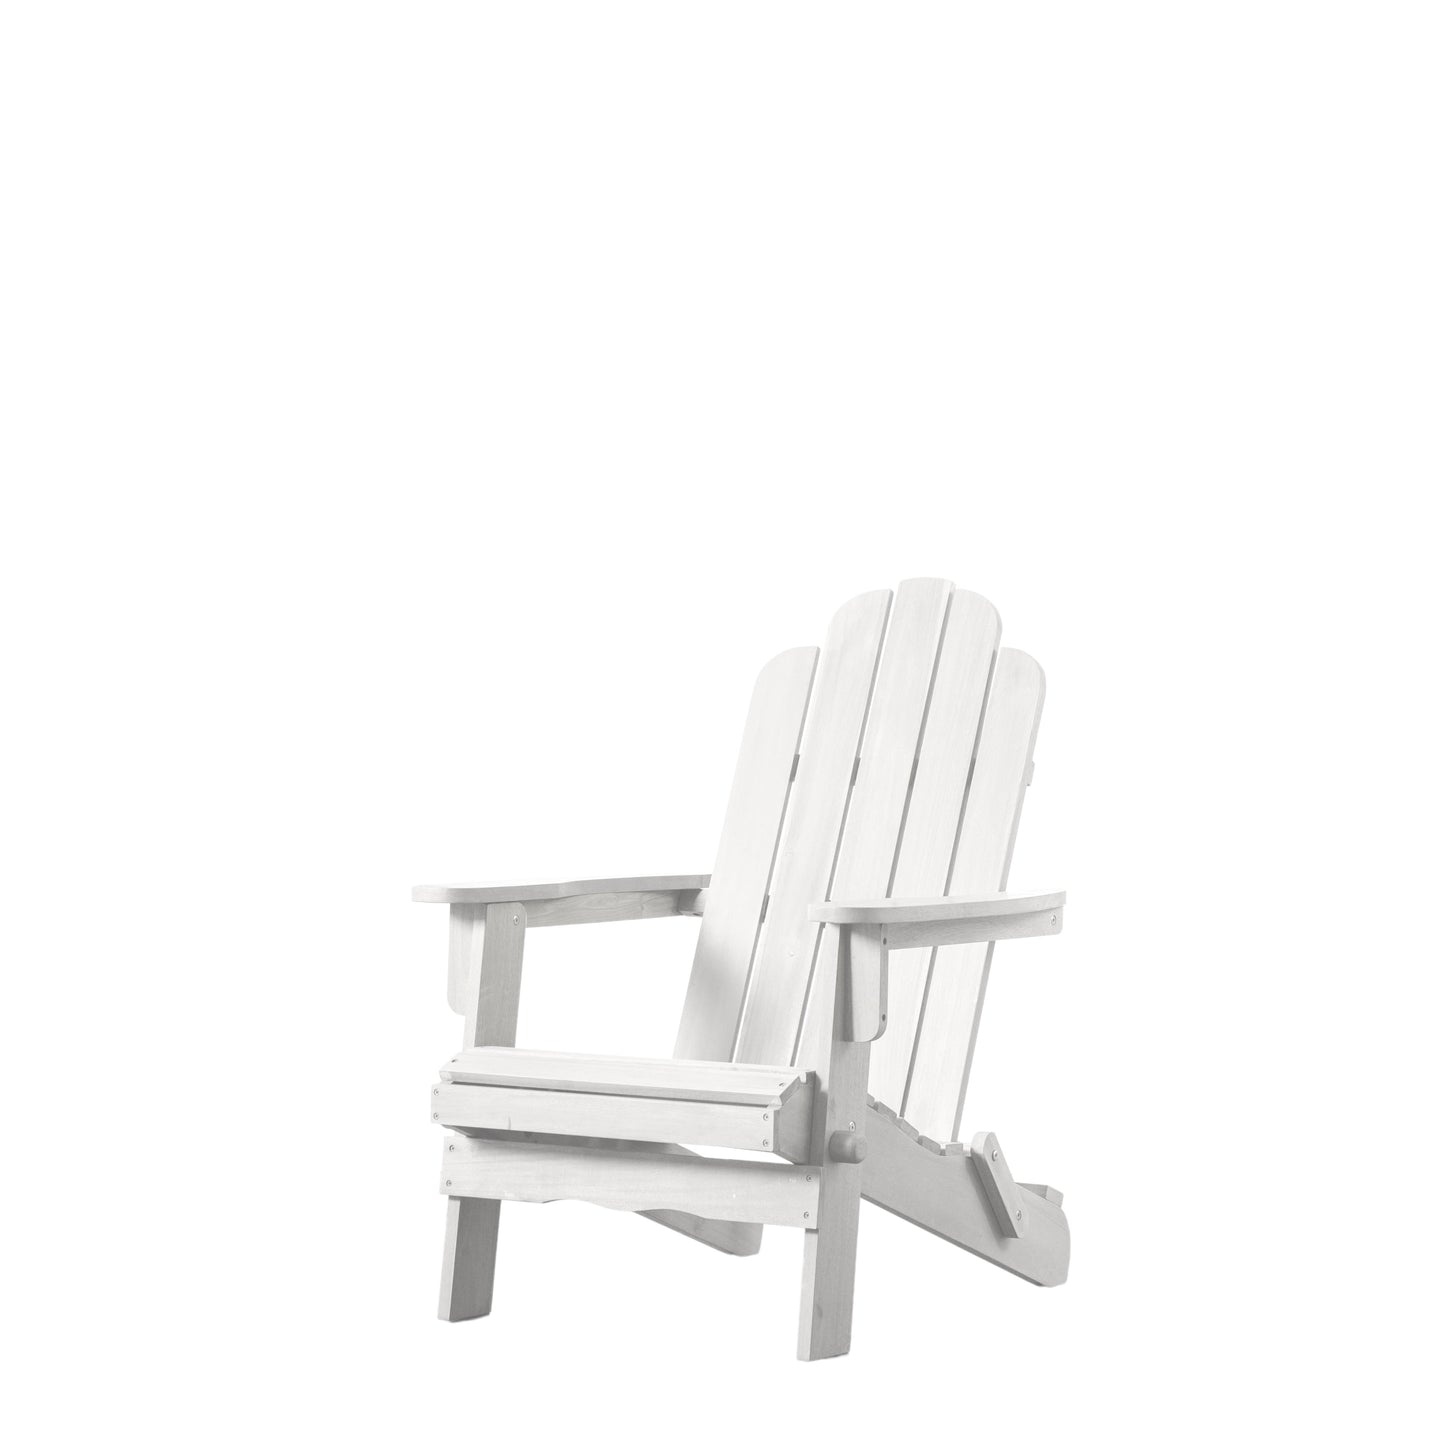 A whitewashed Barley Lounge Chair for interior decor and home furniture by Kikiathome.co.uk, showcased on a white background.